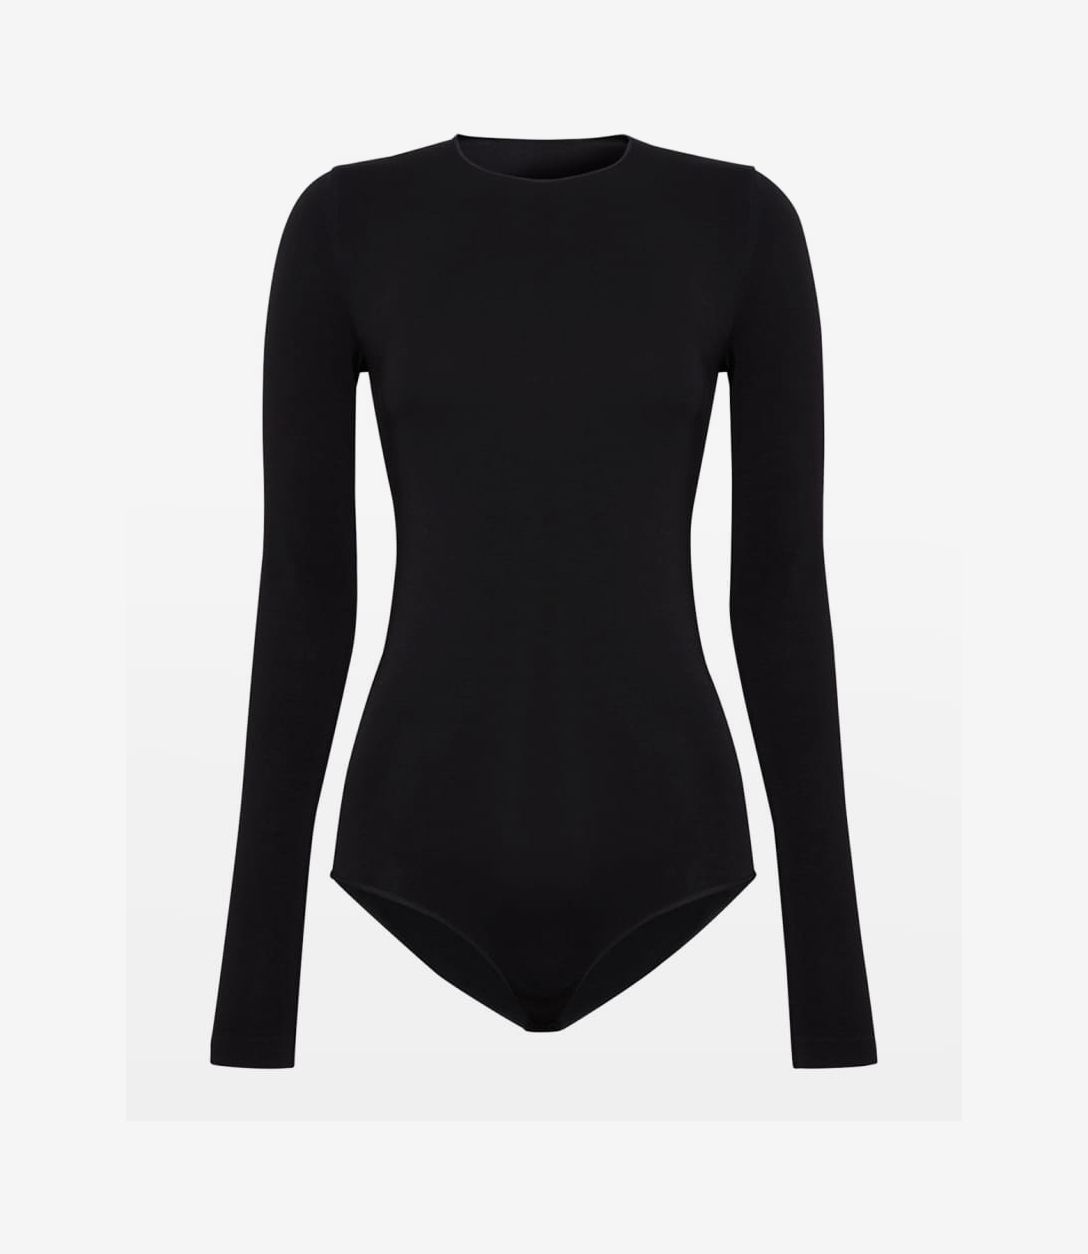 Wolford Buenos Aires caramel bodysuit sale